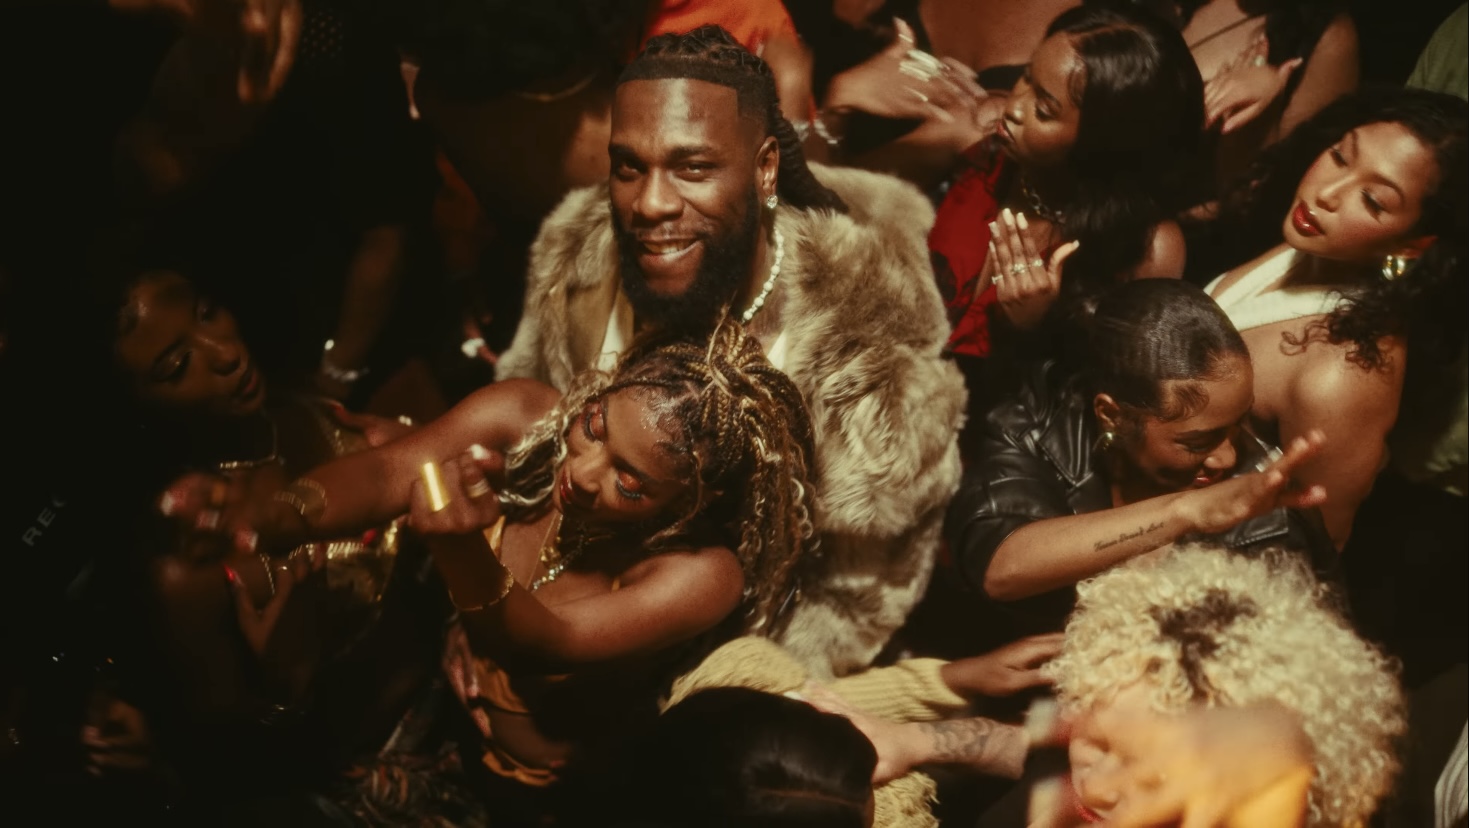 Burna Boy Releases Visuals for "Tested, Approved and Trusted”